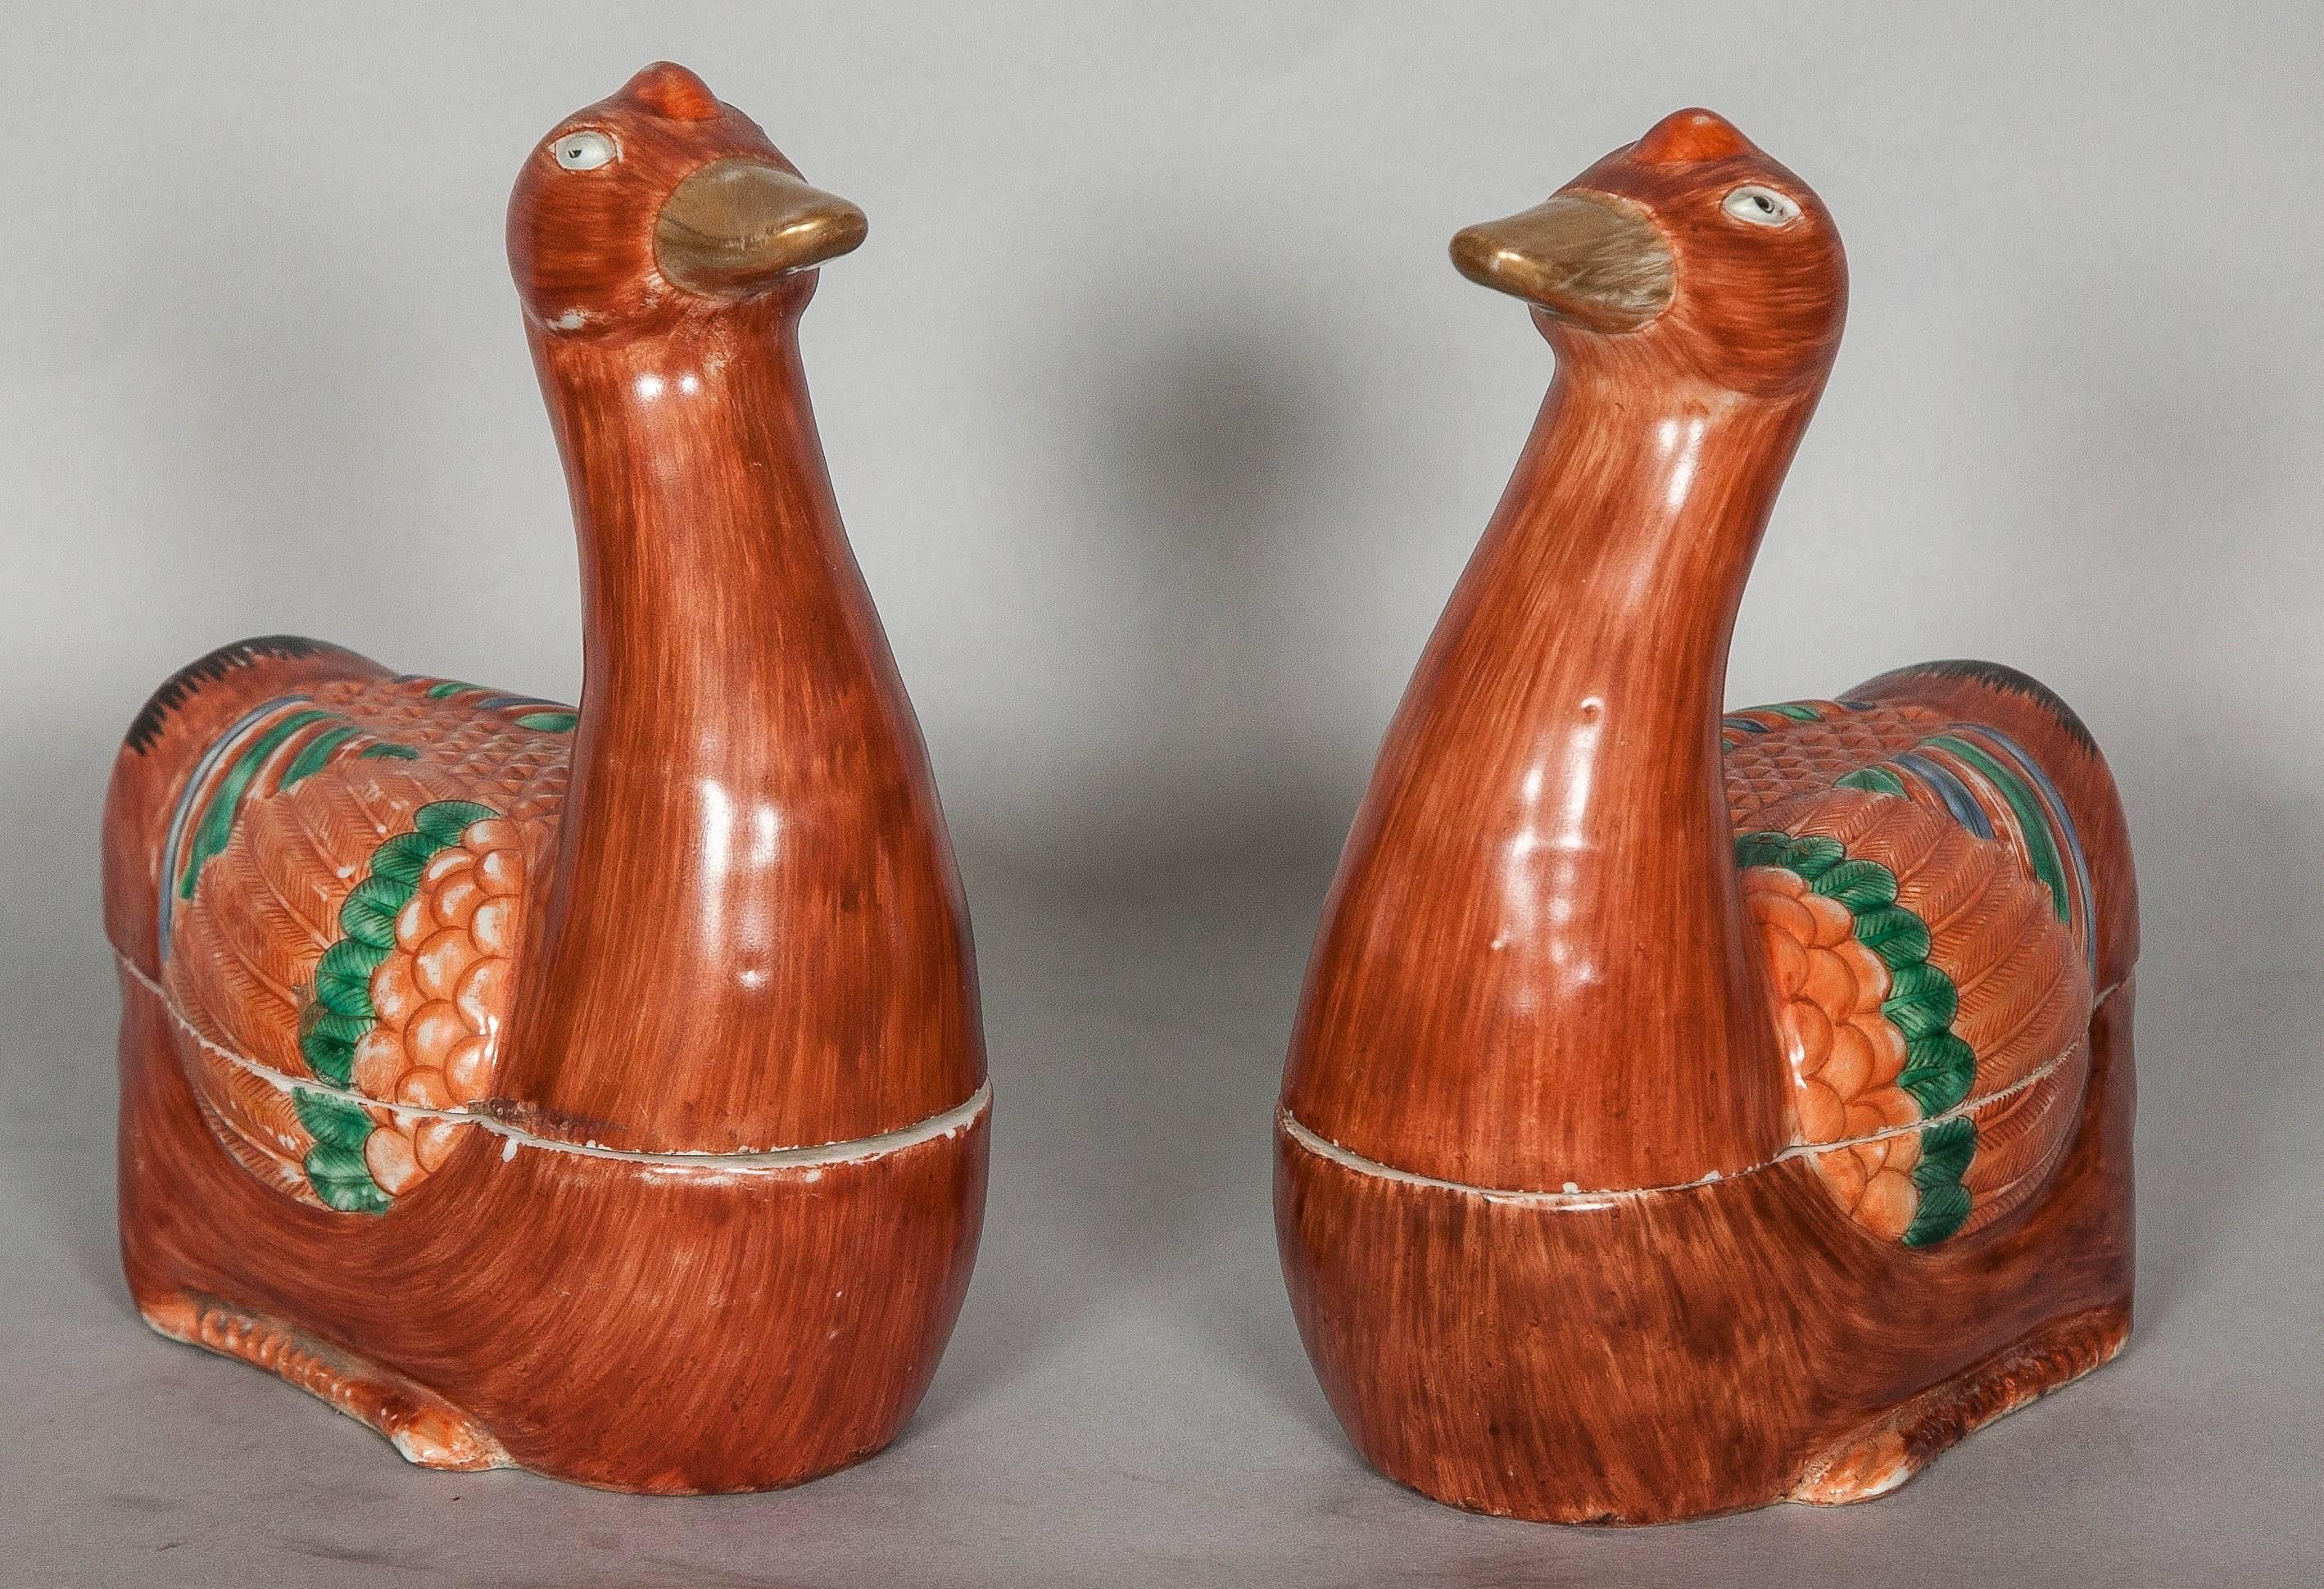 A decorative and colorful pair of mid 19th century Chinese tureens each modelled in the form of a recumbent goose with legs tucked underneath its body and head looking forward, the body pencilled with iron-red feathers, the wings brightly enamelled